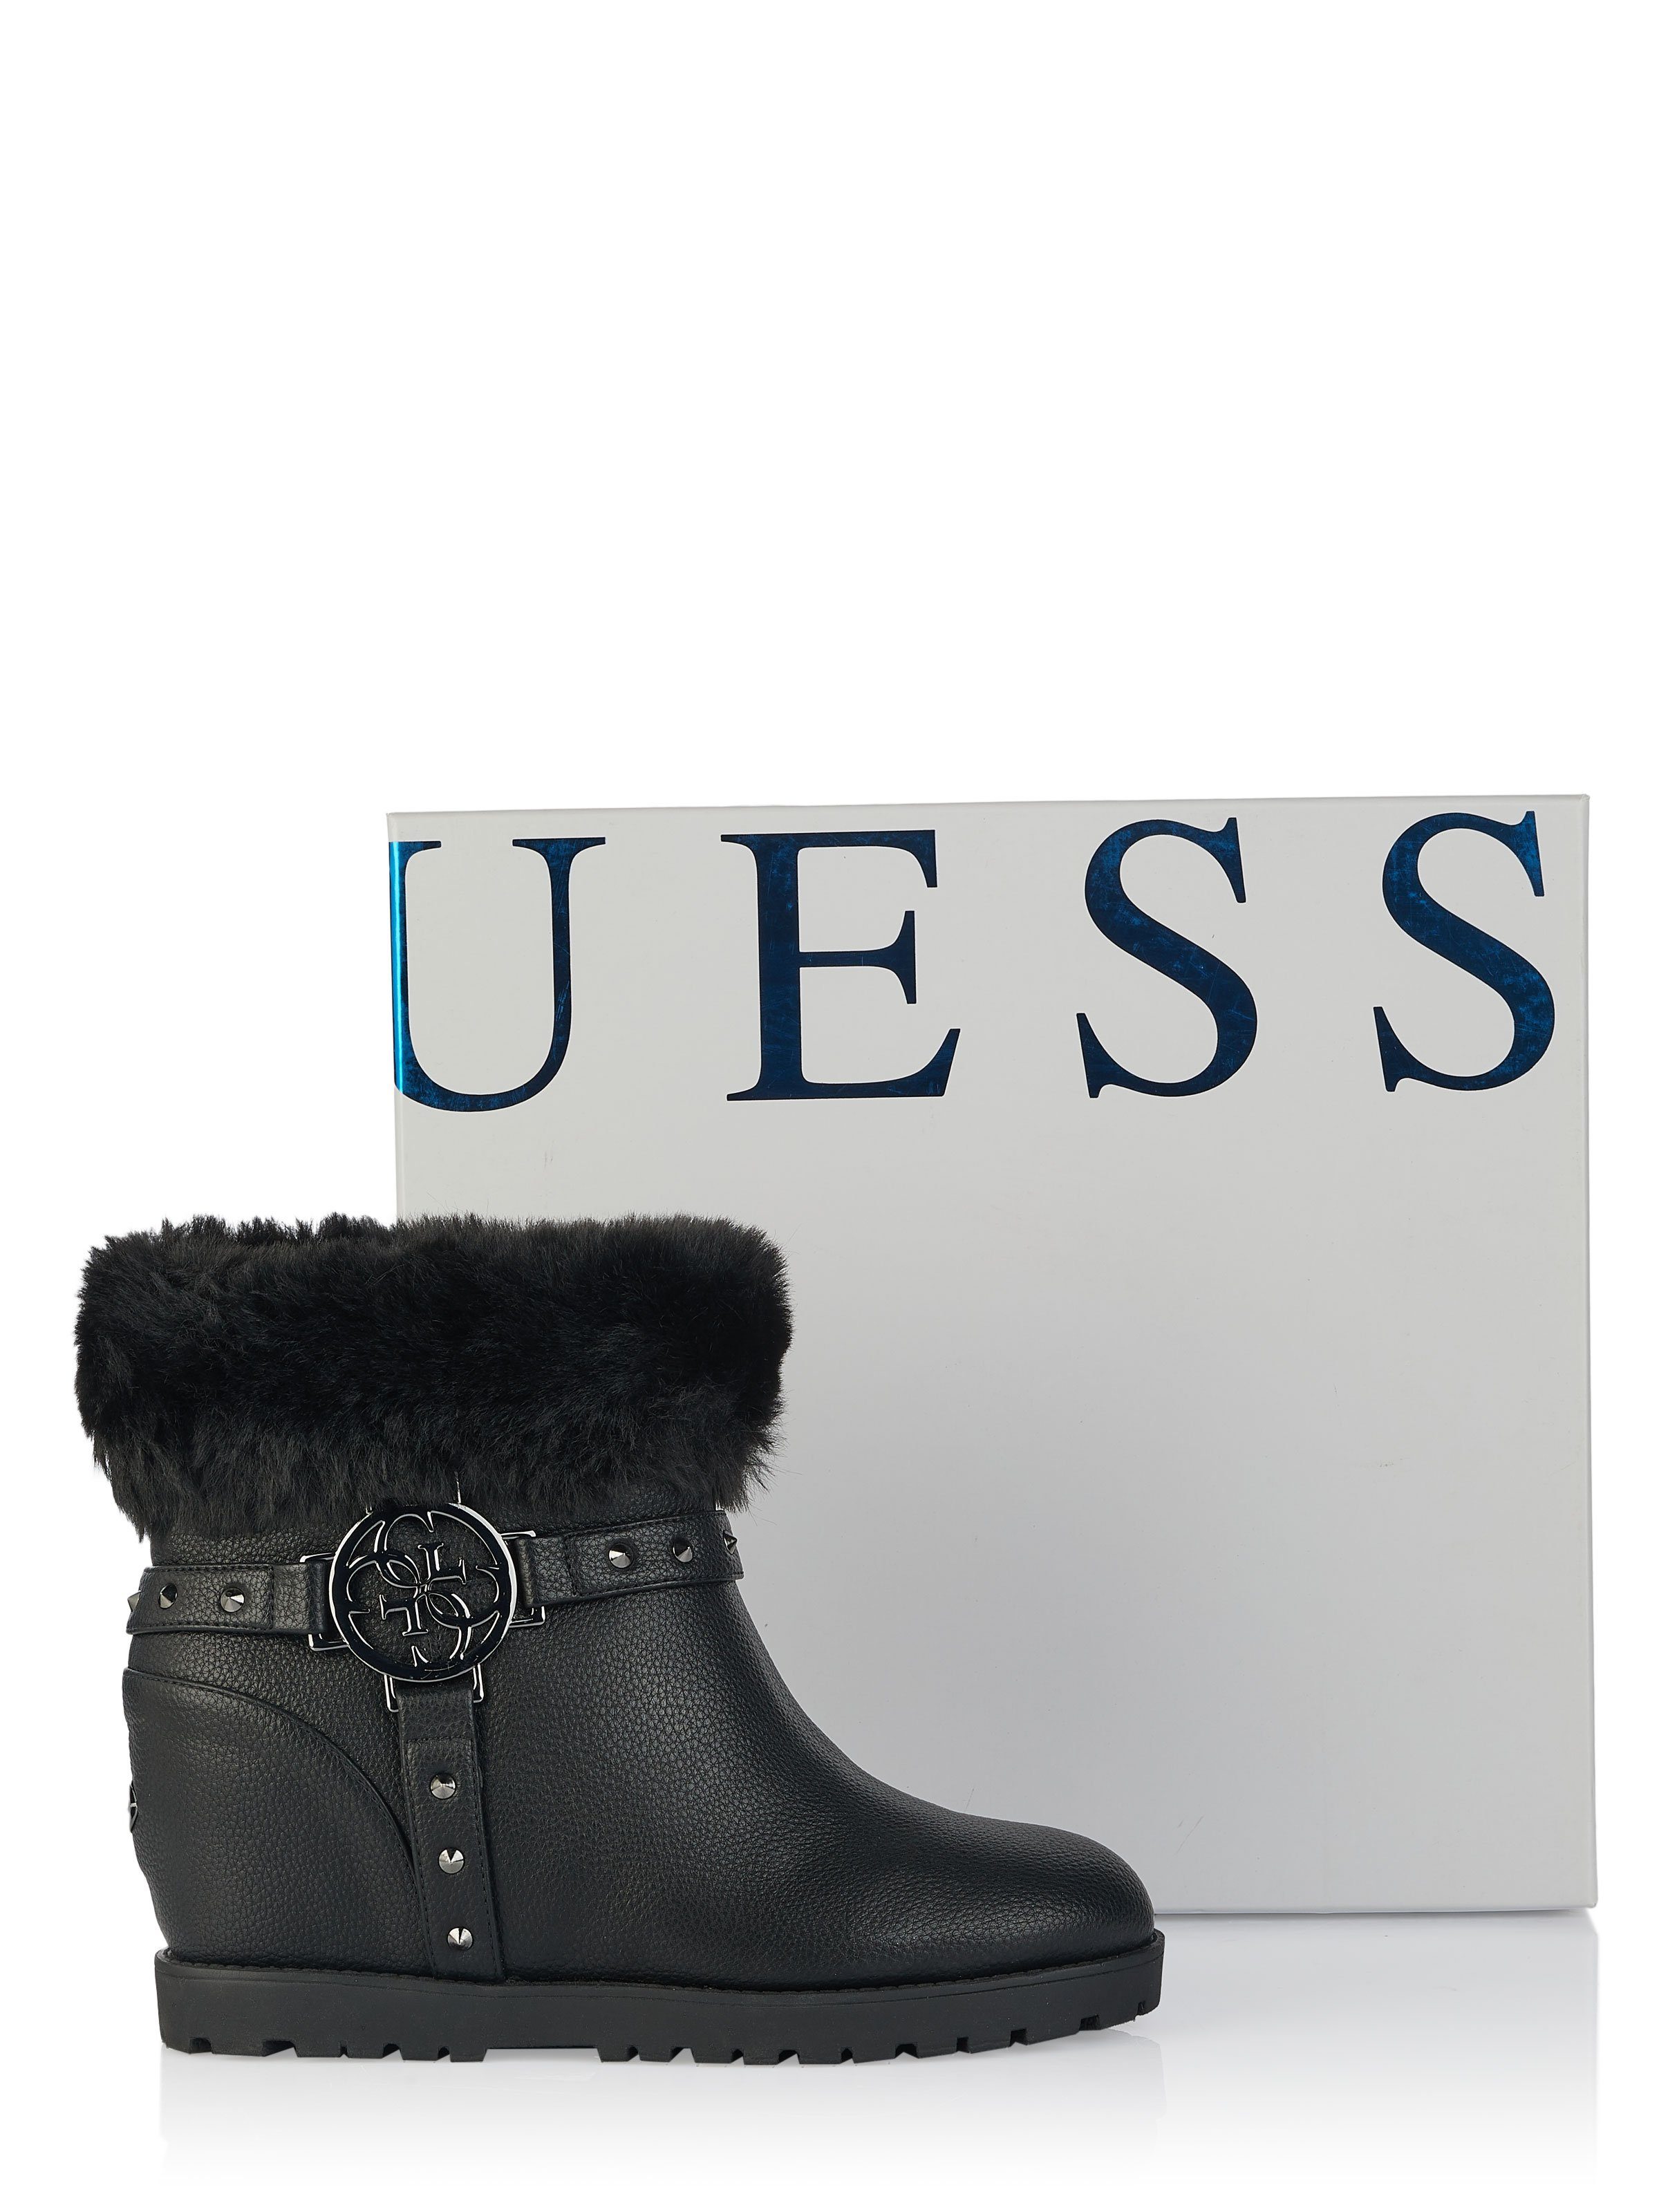 Guess Stiefel GUESS Ankleboots